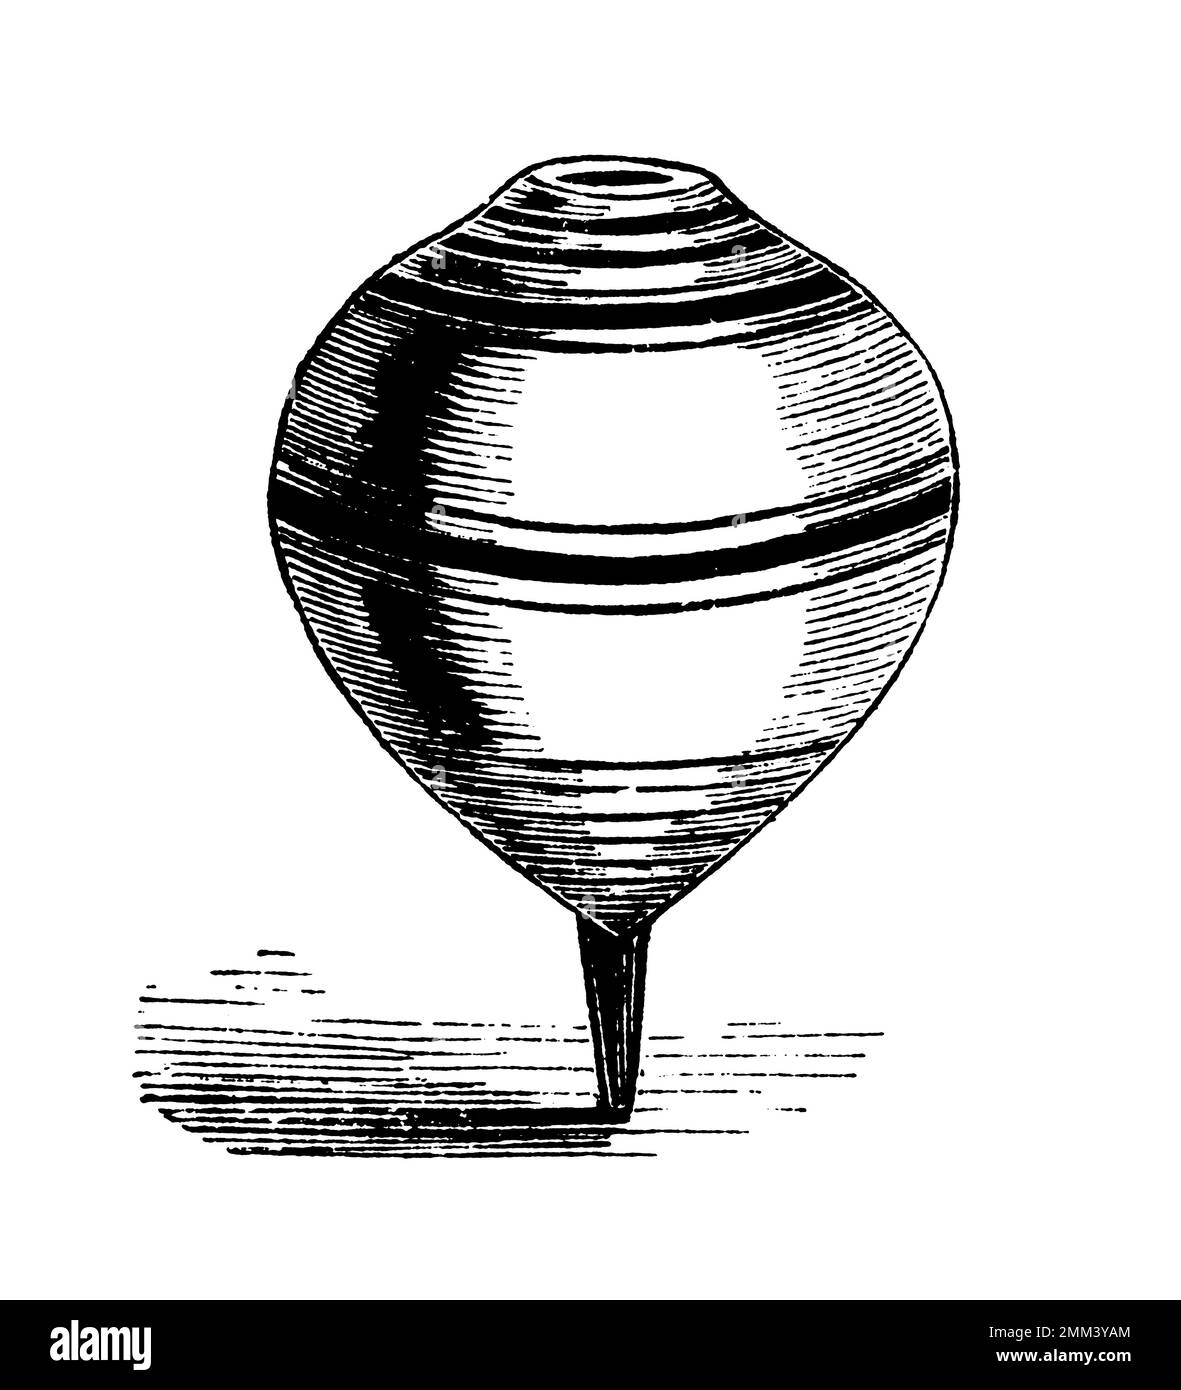 Antique illustration of peg-top, a toy that can be spun on an axis, also known as spinning top or spintop. Published in American’s Boy Book of Sports Stock Photo